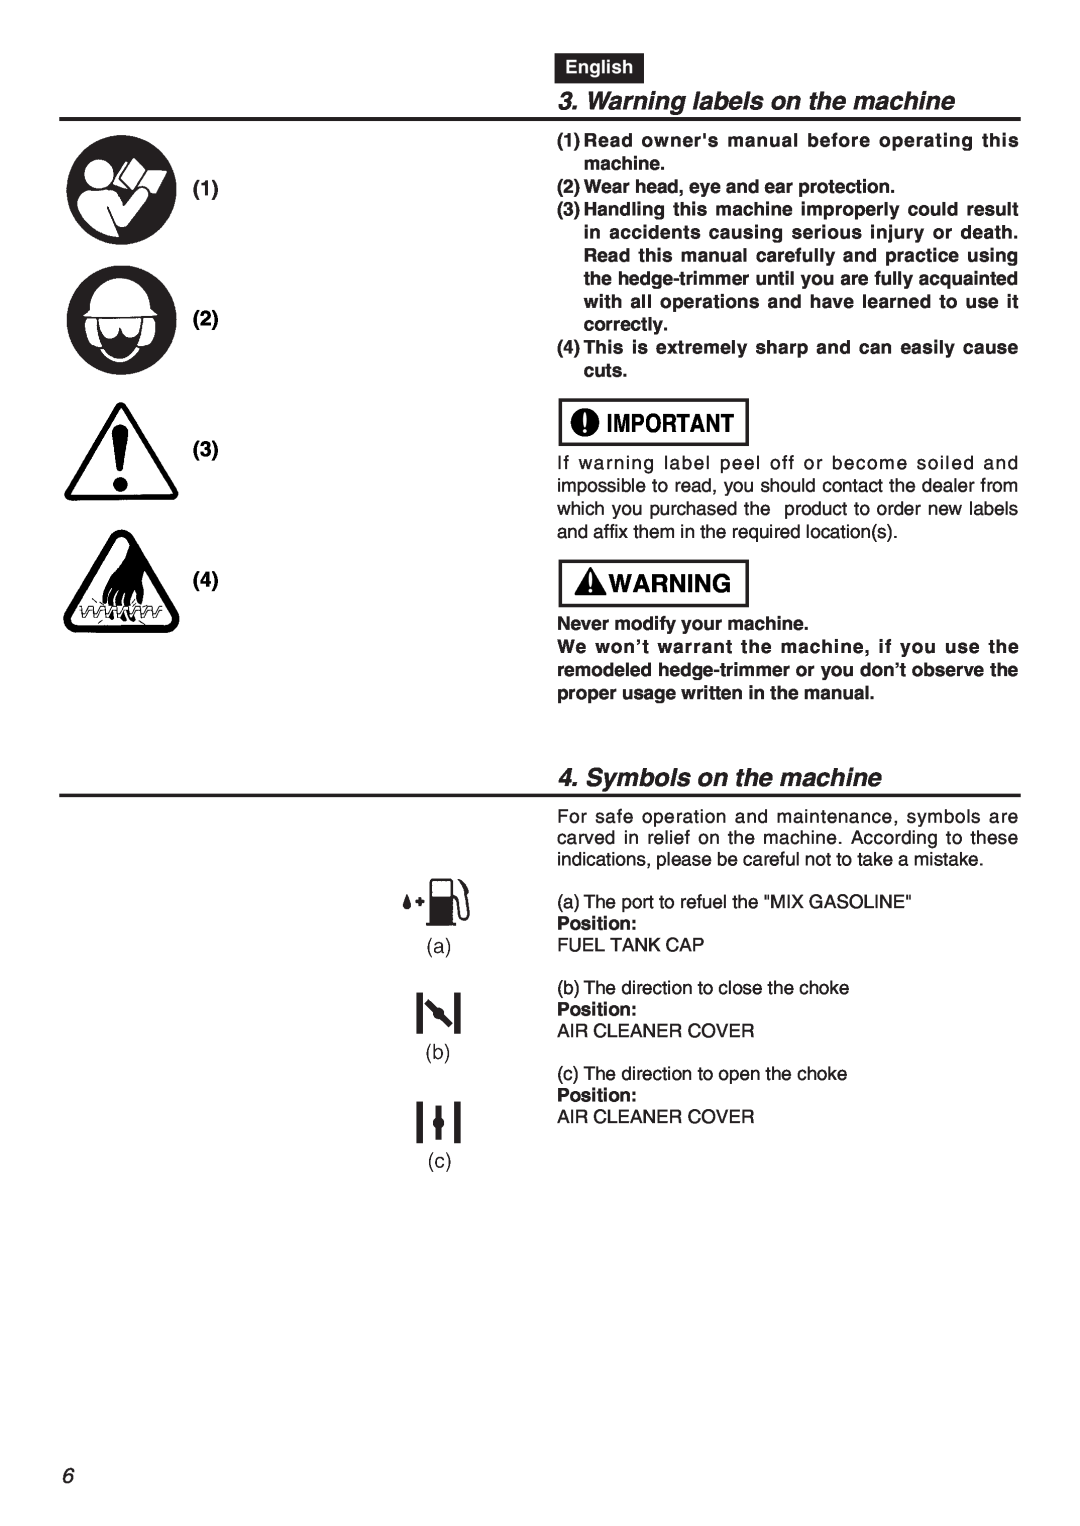 RedMax CHTZ2401-CA Warning labels on the machine, Symbols on the machine, English, a The port to refuel the MIX GASOLINE 